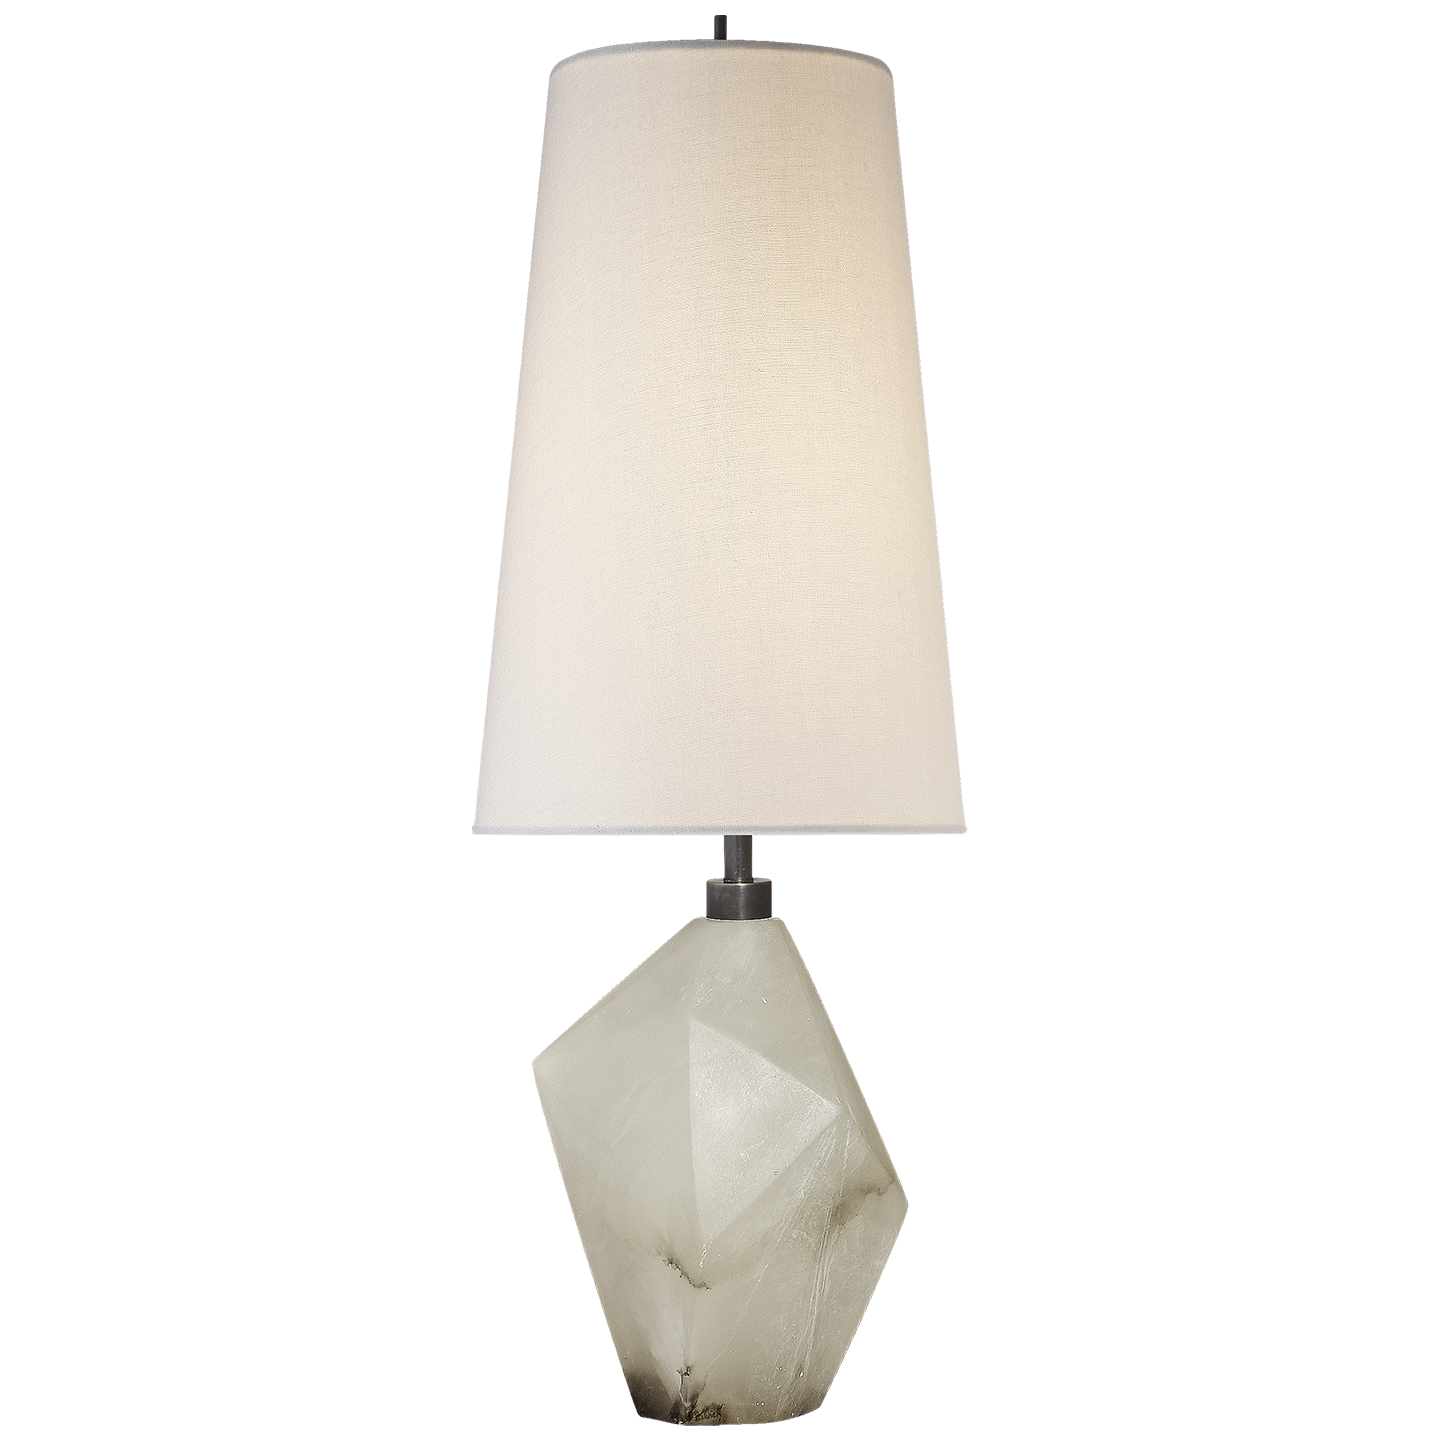 halcyon accent table lamp alabaster with linen shade burkdecor linens half circle hall round side antique pier dining room grey patio furniture card target woodard aluminum west